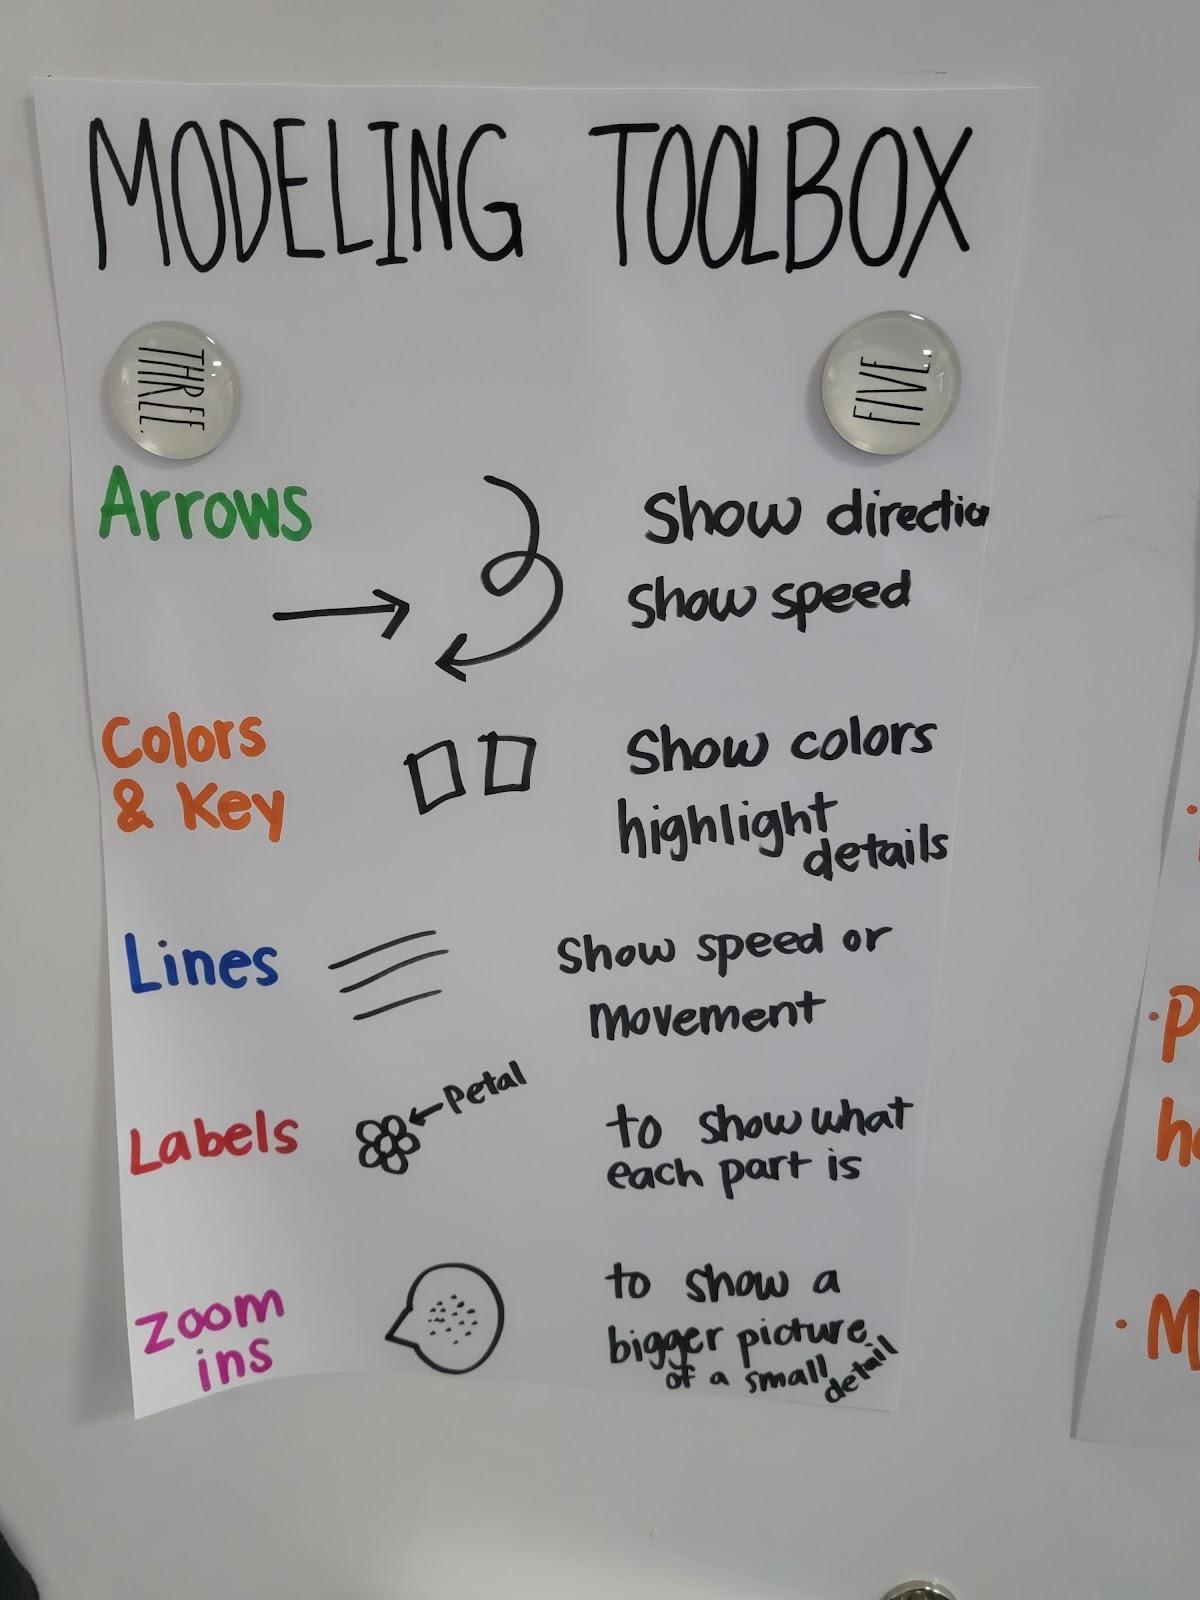 Illustrates parts of a modeling toolbox. This includes the use of arrows to show direction and speed, colors & key to sow colors and highlight details, lines to show speed or movement, labels to show what each part is, and zoom ins to show a bigger picture of a small detail.